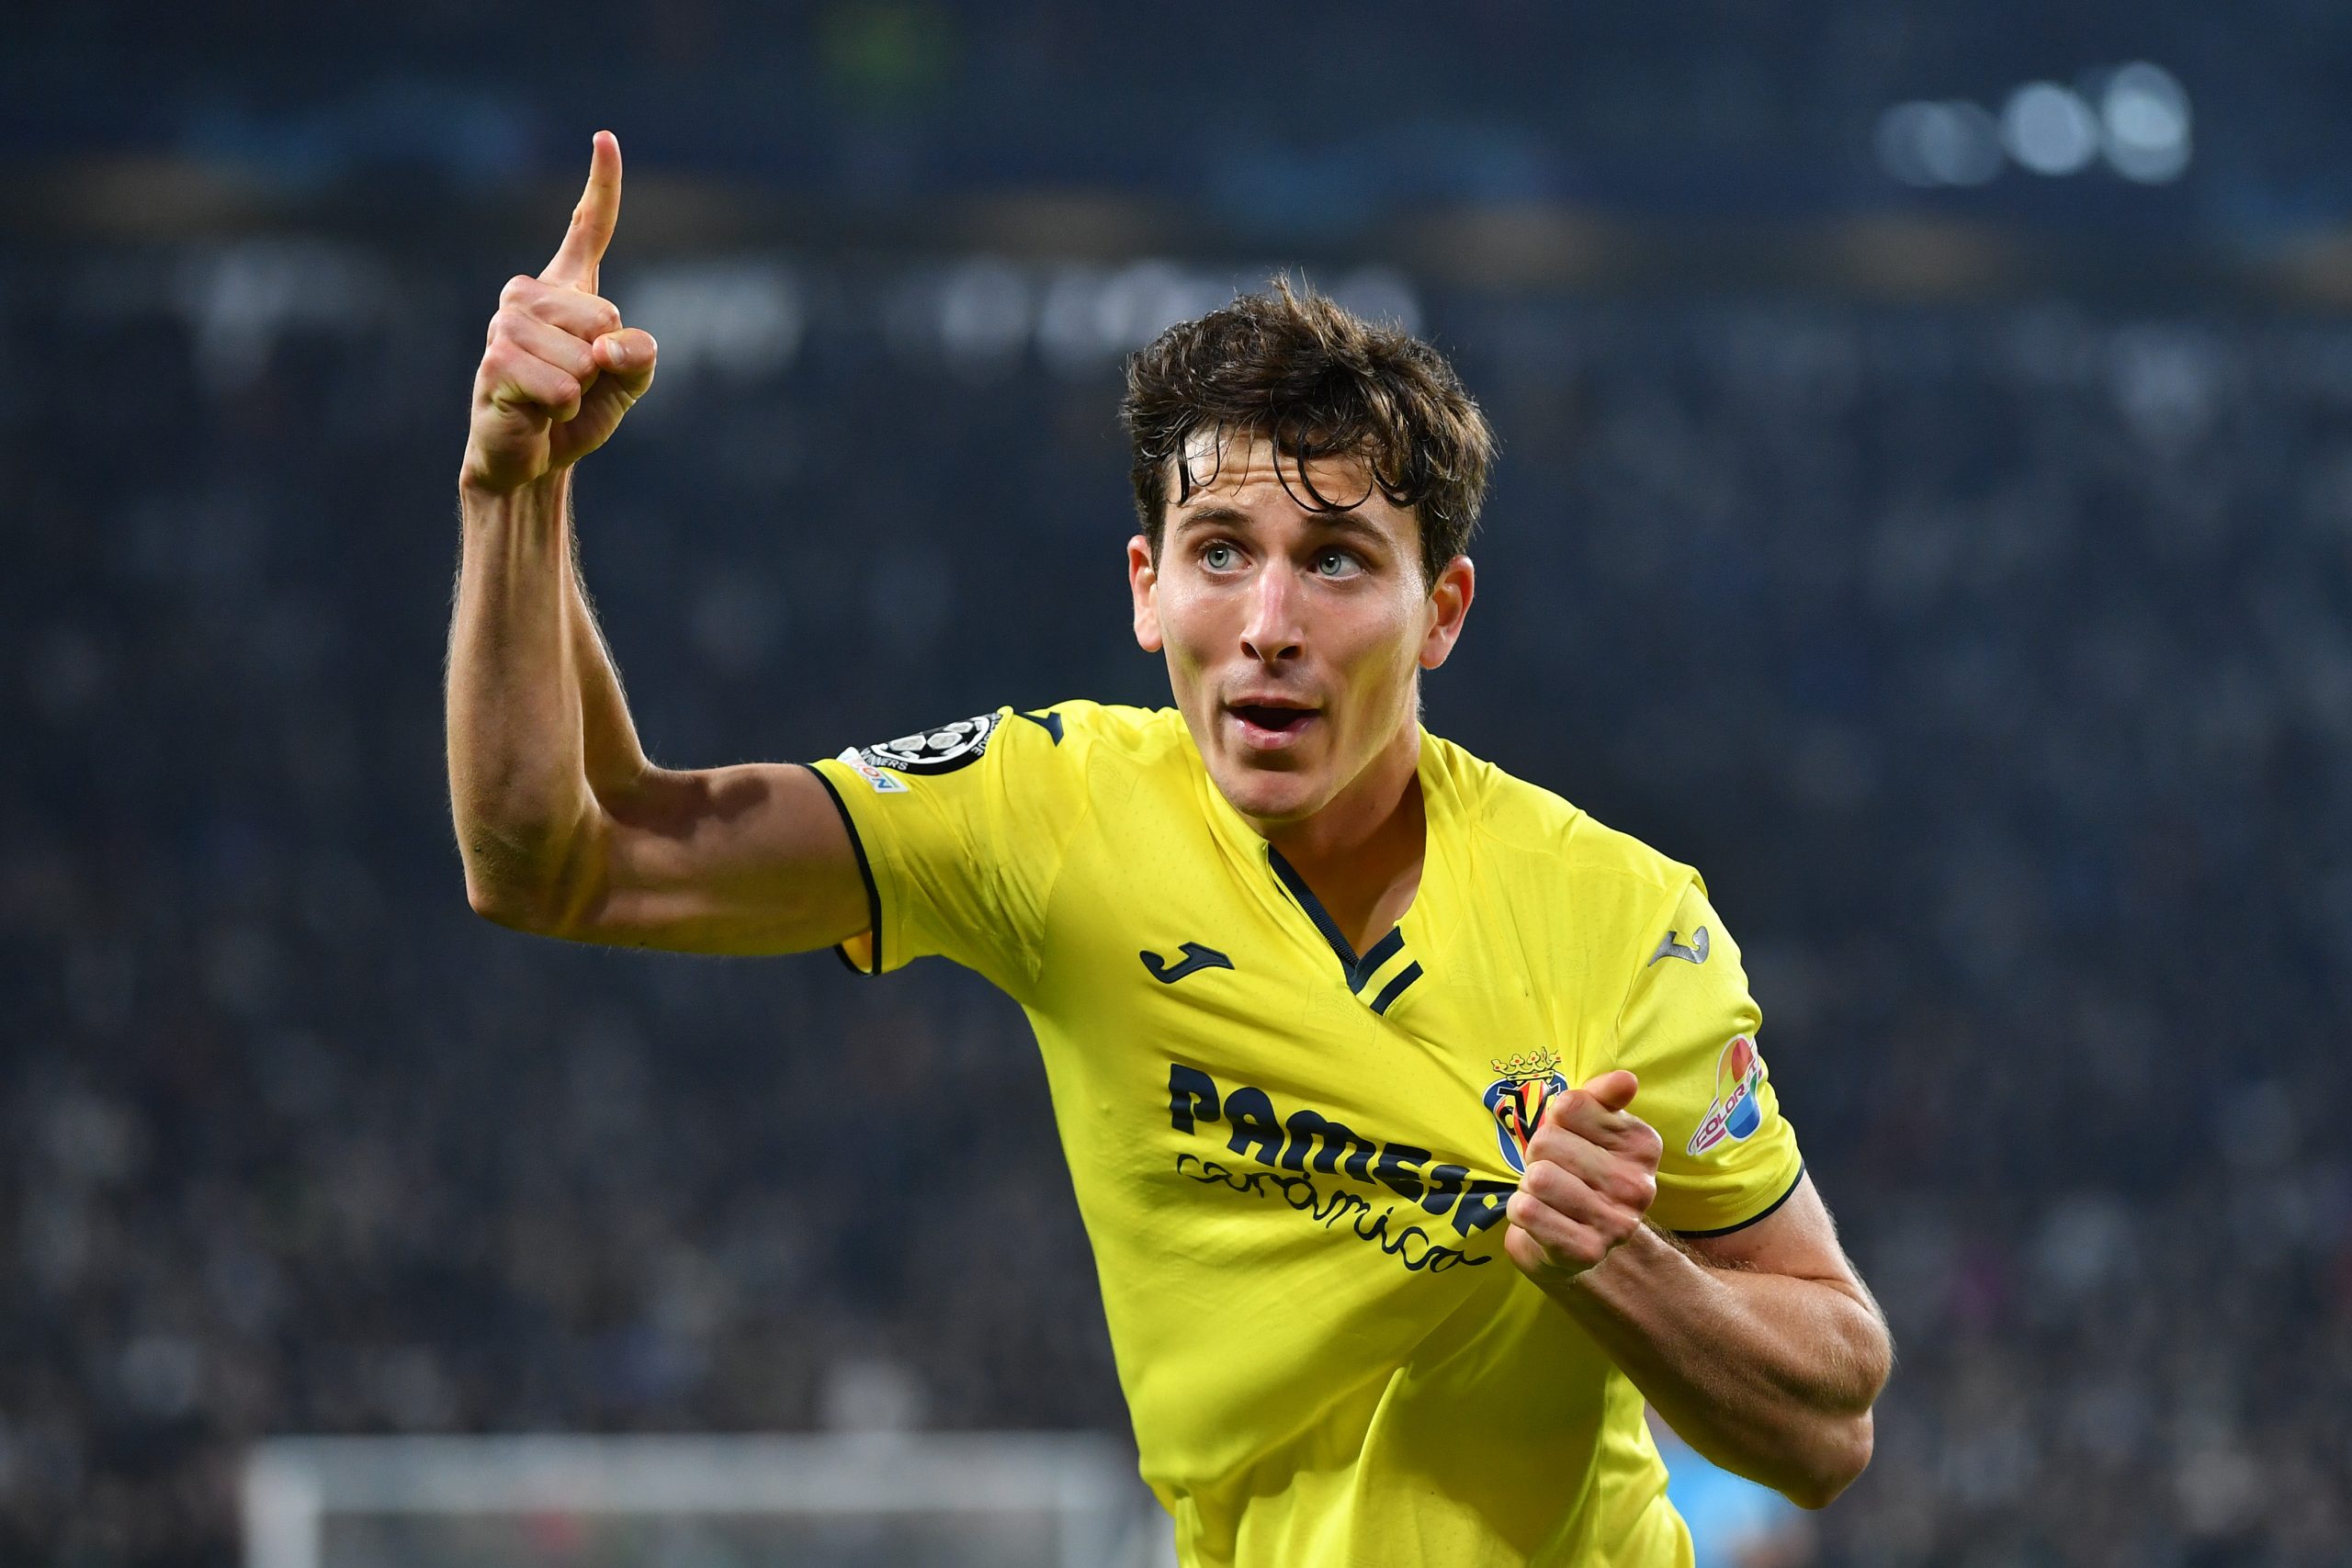 Villarreal defender Pau Torres plays down talks of an exit in the summer amid transfer interest from Manchester United.